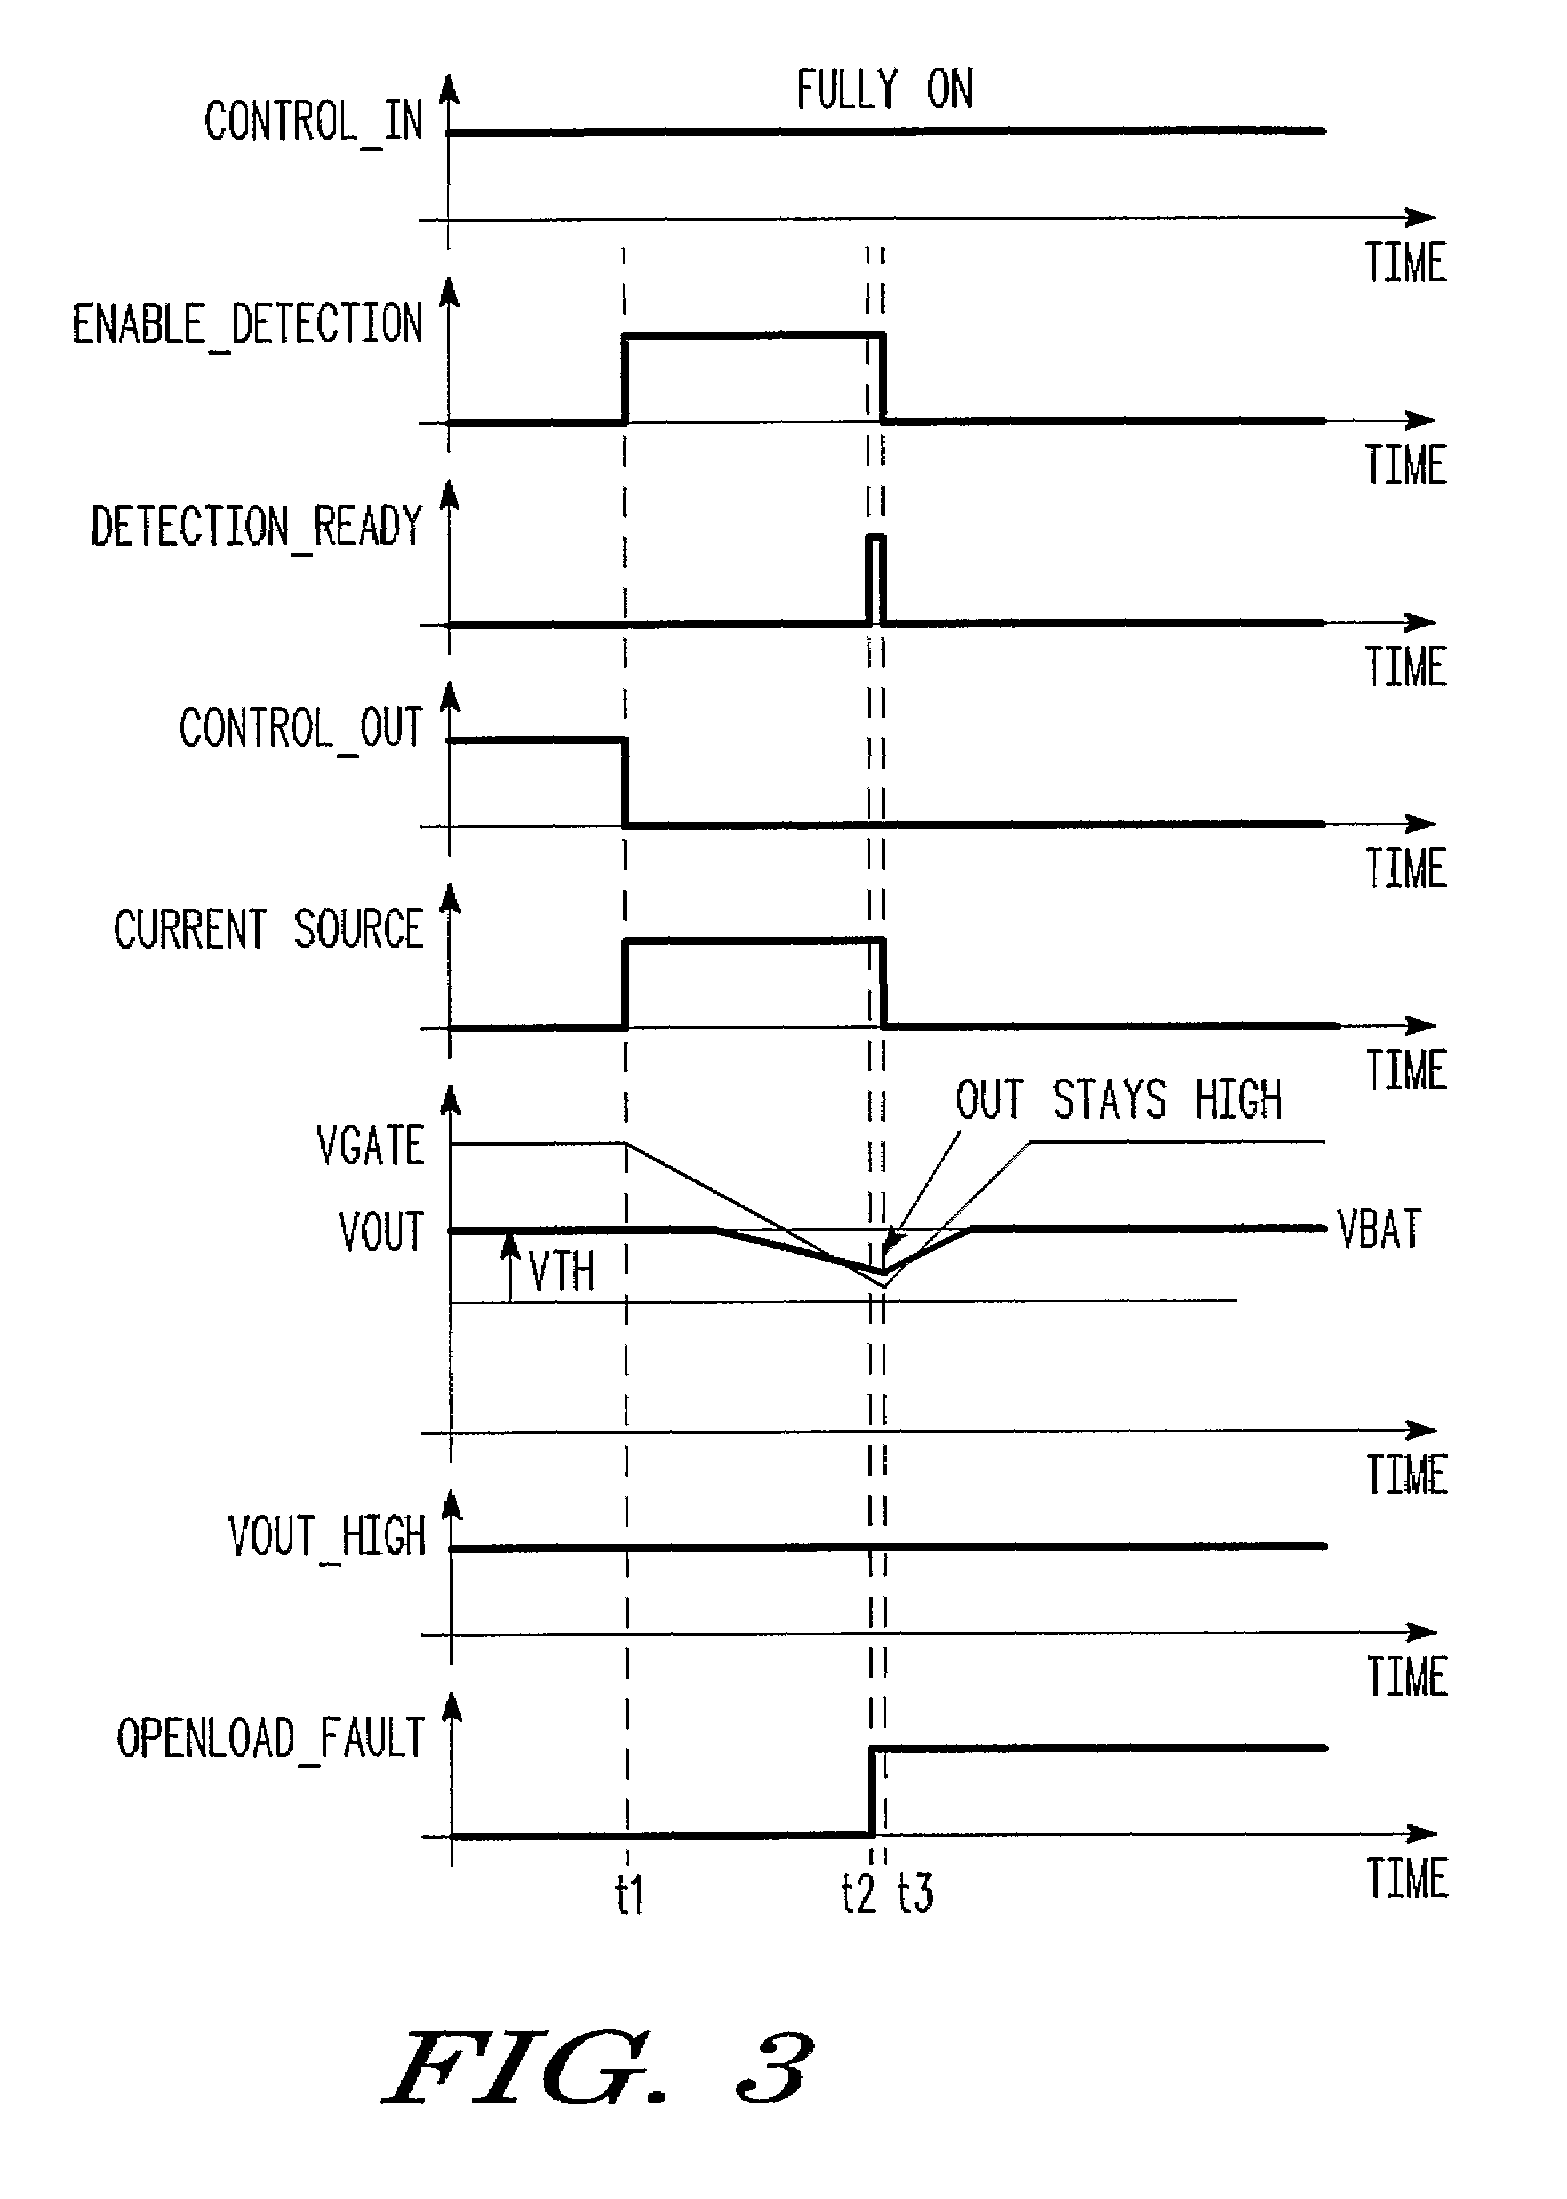 Power switching apparatus with open-load detection